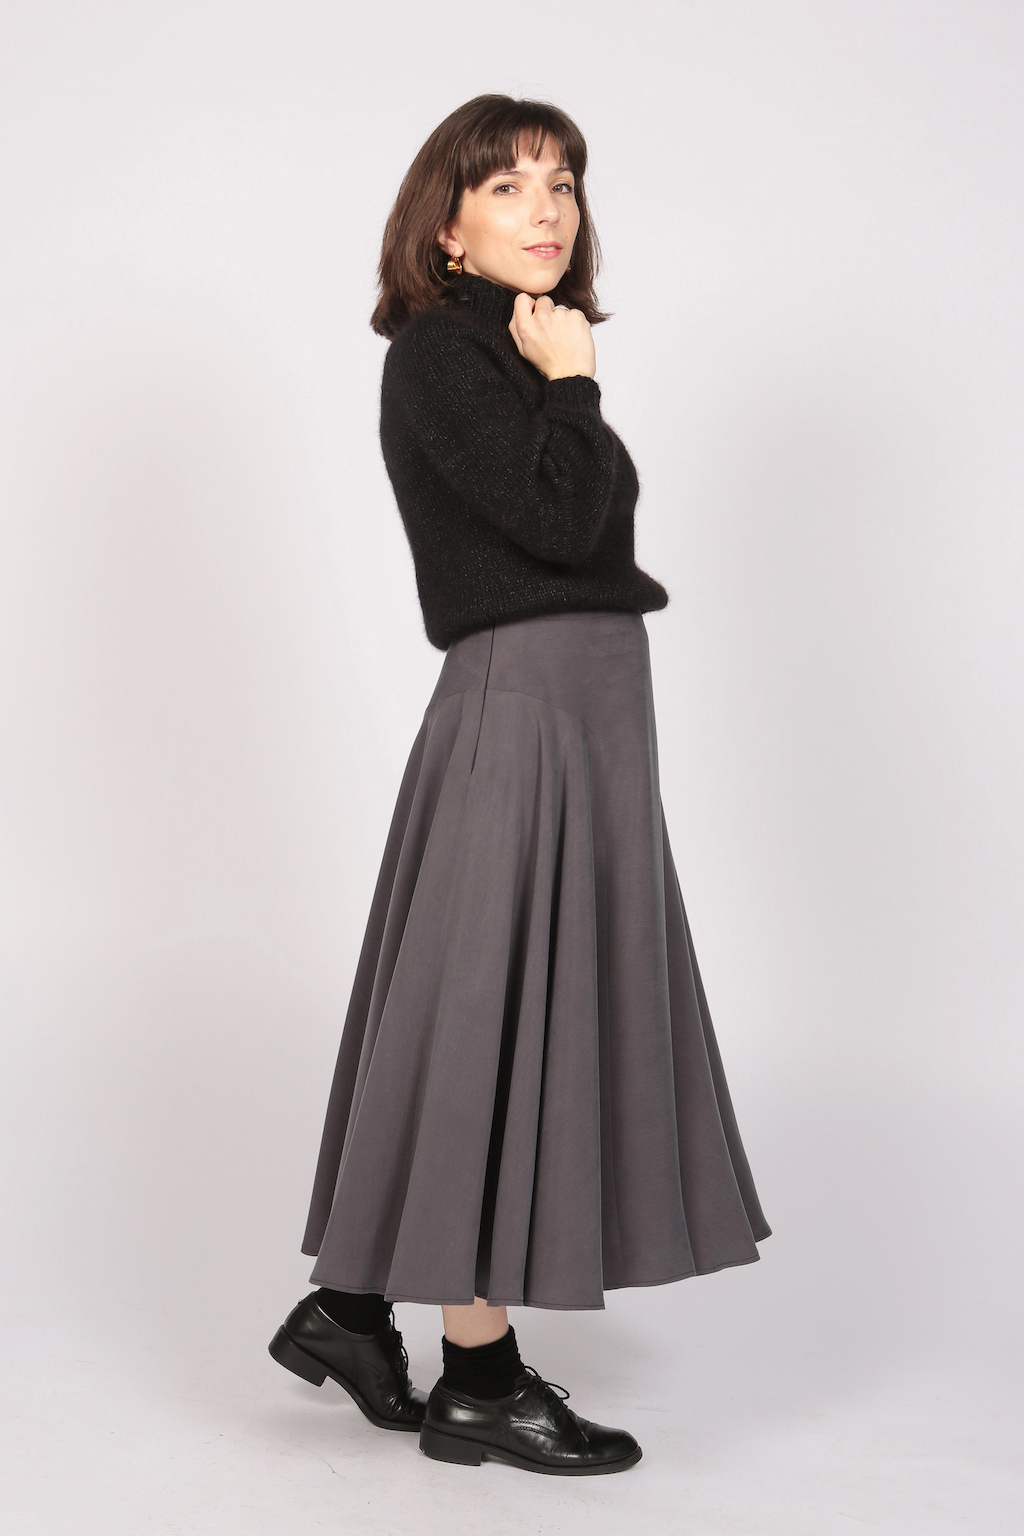 Woman wearing the Averse Skirt sewing pattern from Camimade on The Fold Line. A skirt pattern made in viscose, tencel, linen, cotton lawn or chambray fabrics, featuring a side invisible zip, midi length finish, curved waistband and a full skirt giving the impression of a circle skirt.